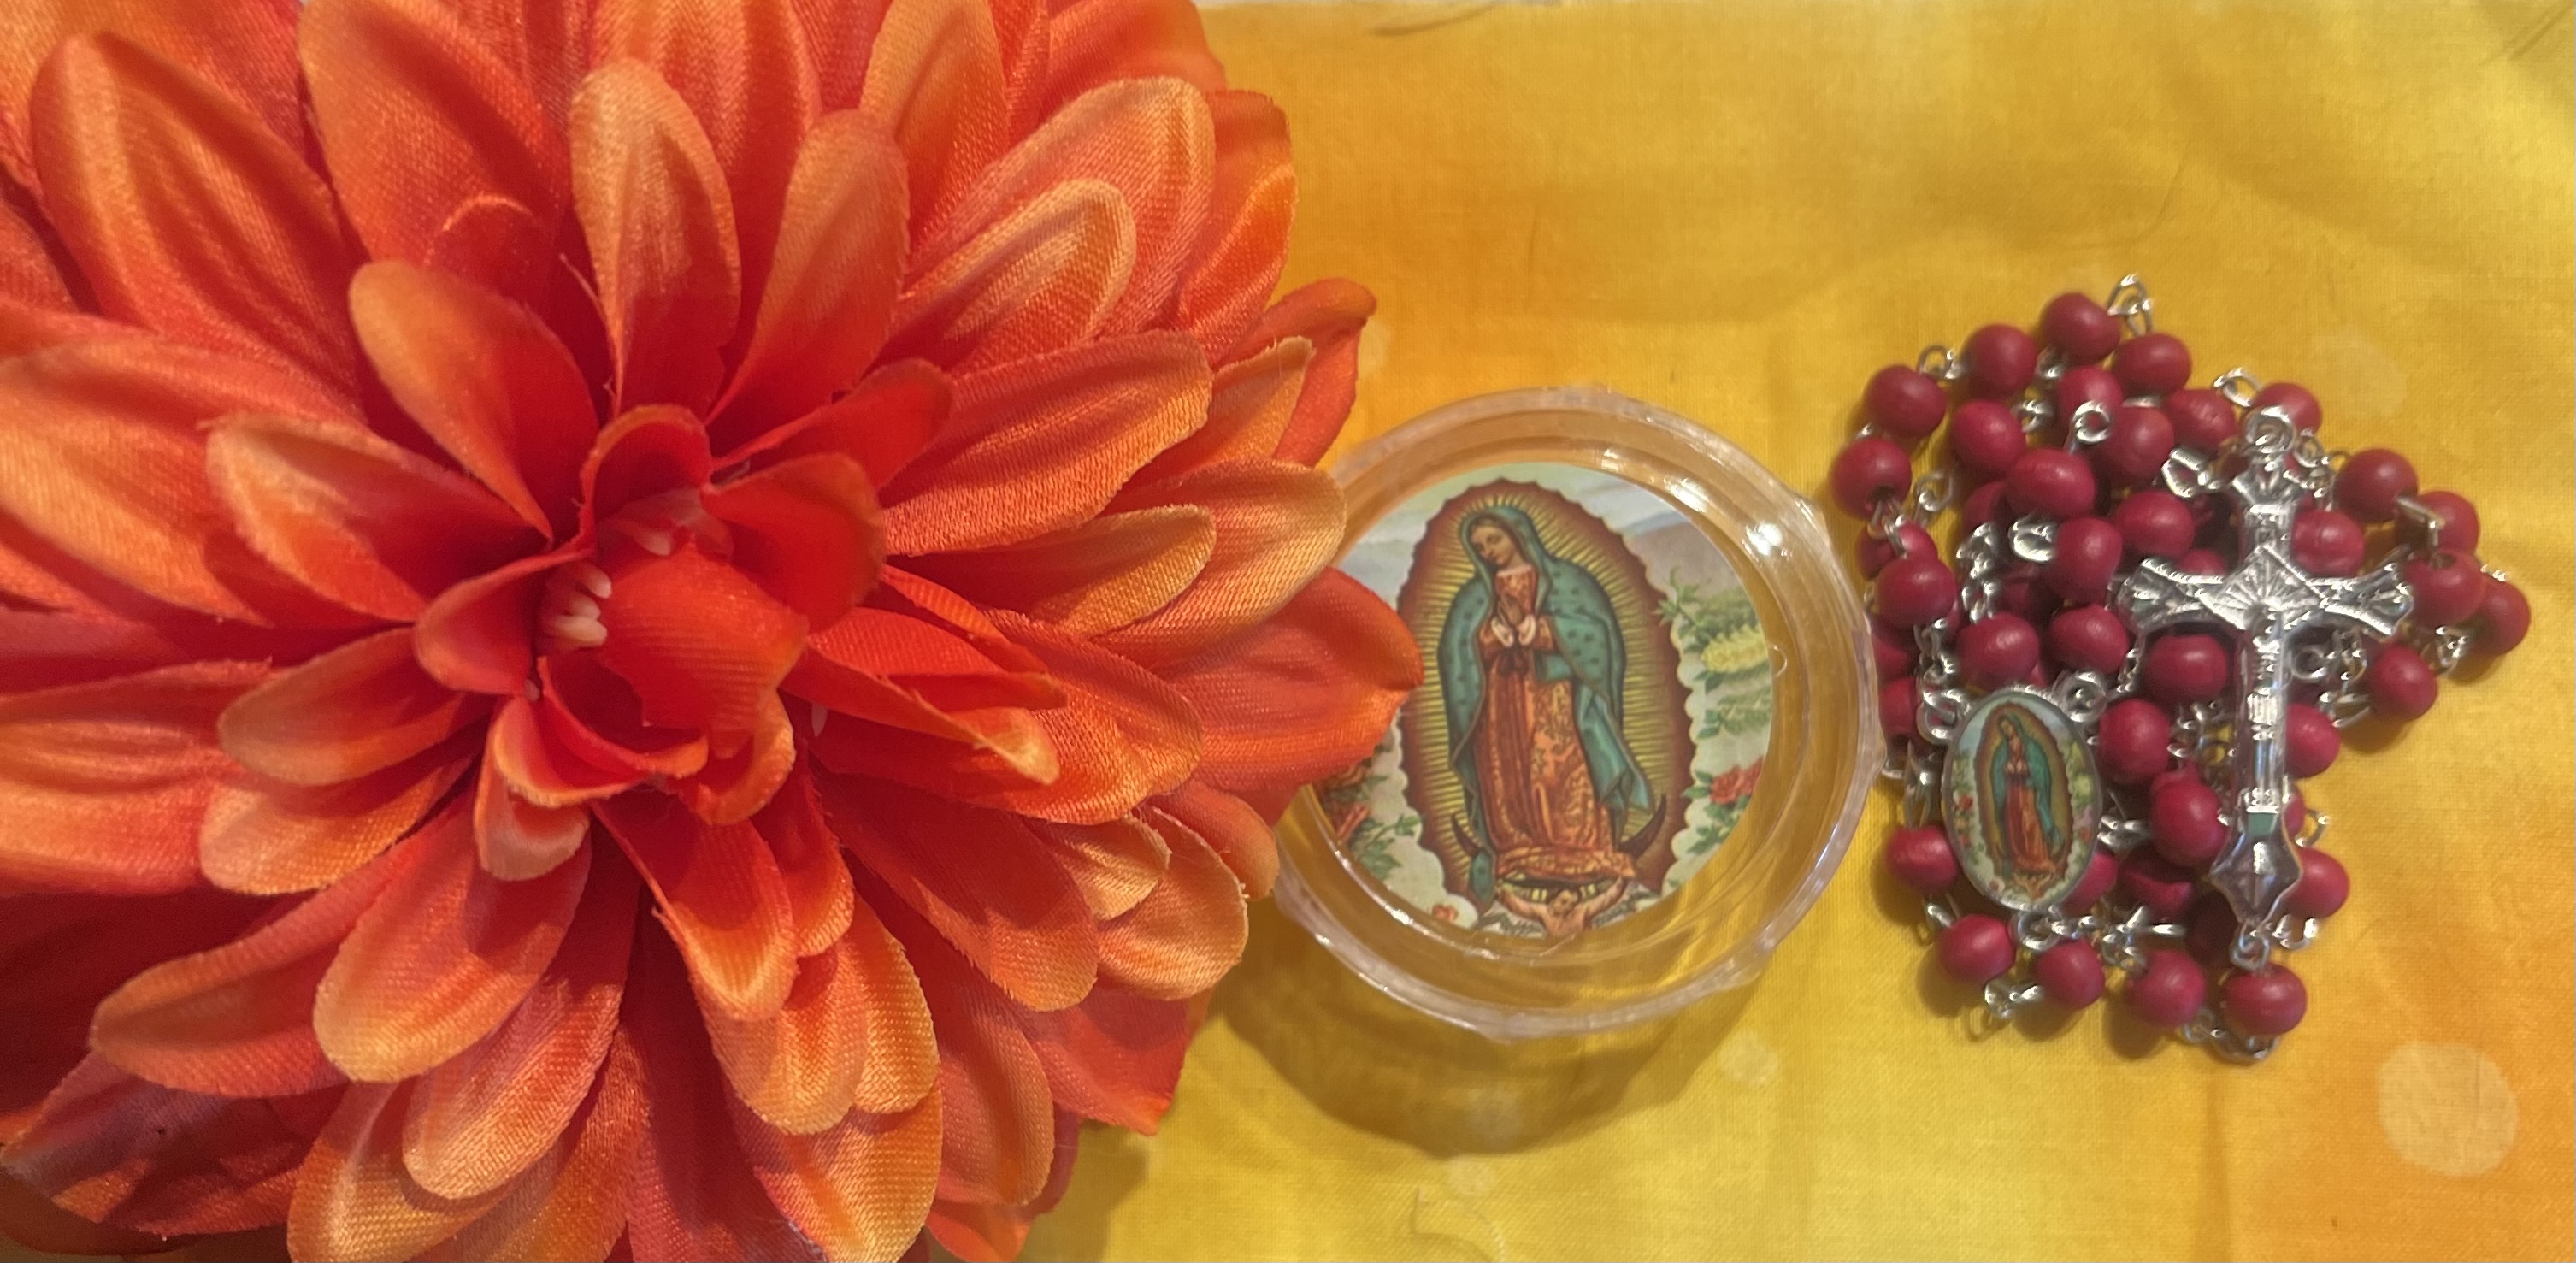 Bright orange flower by a round case showing the Virgin of Guadalupe next to a rosewood rosary